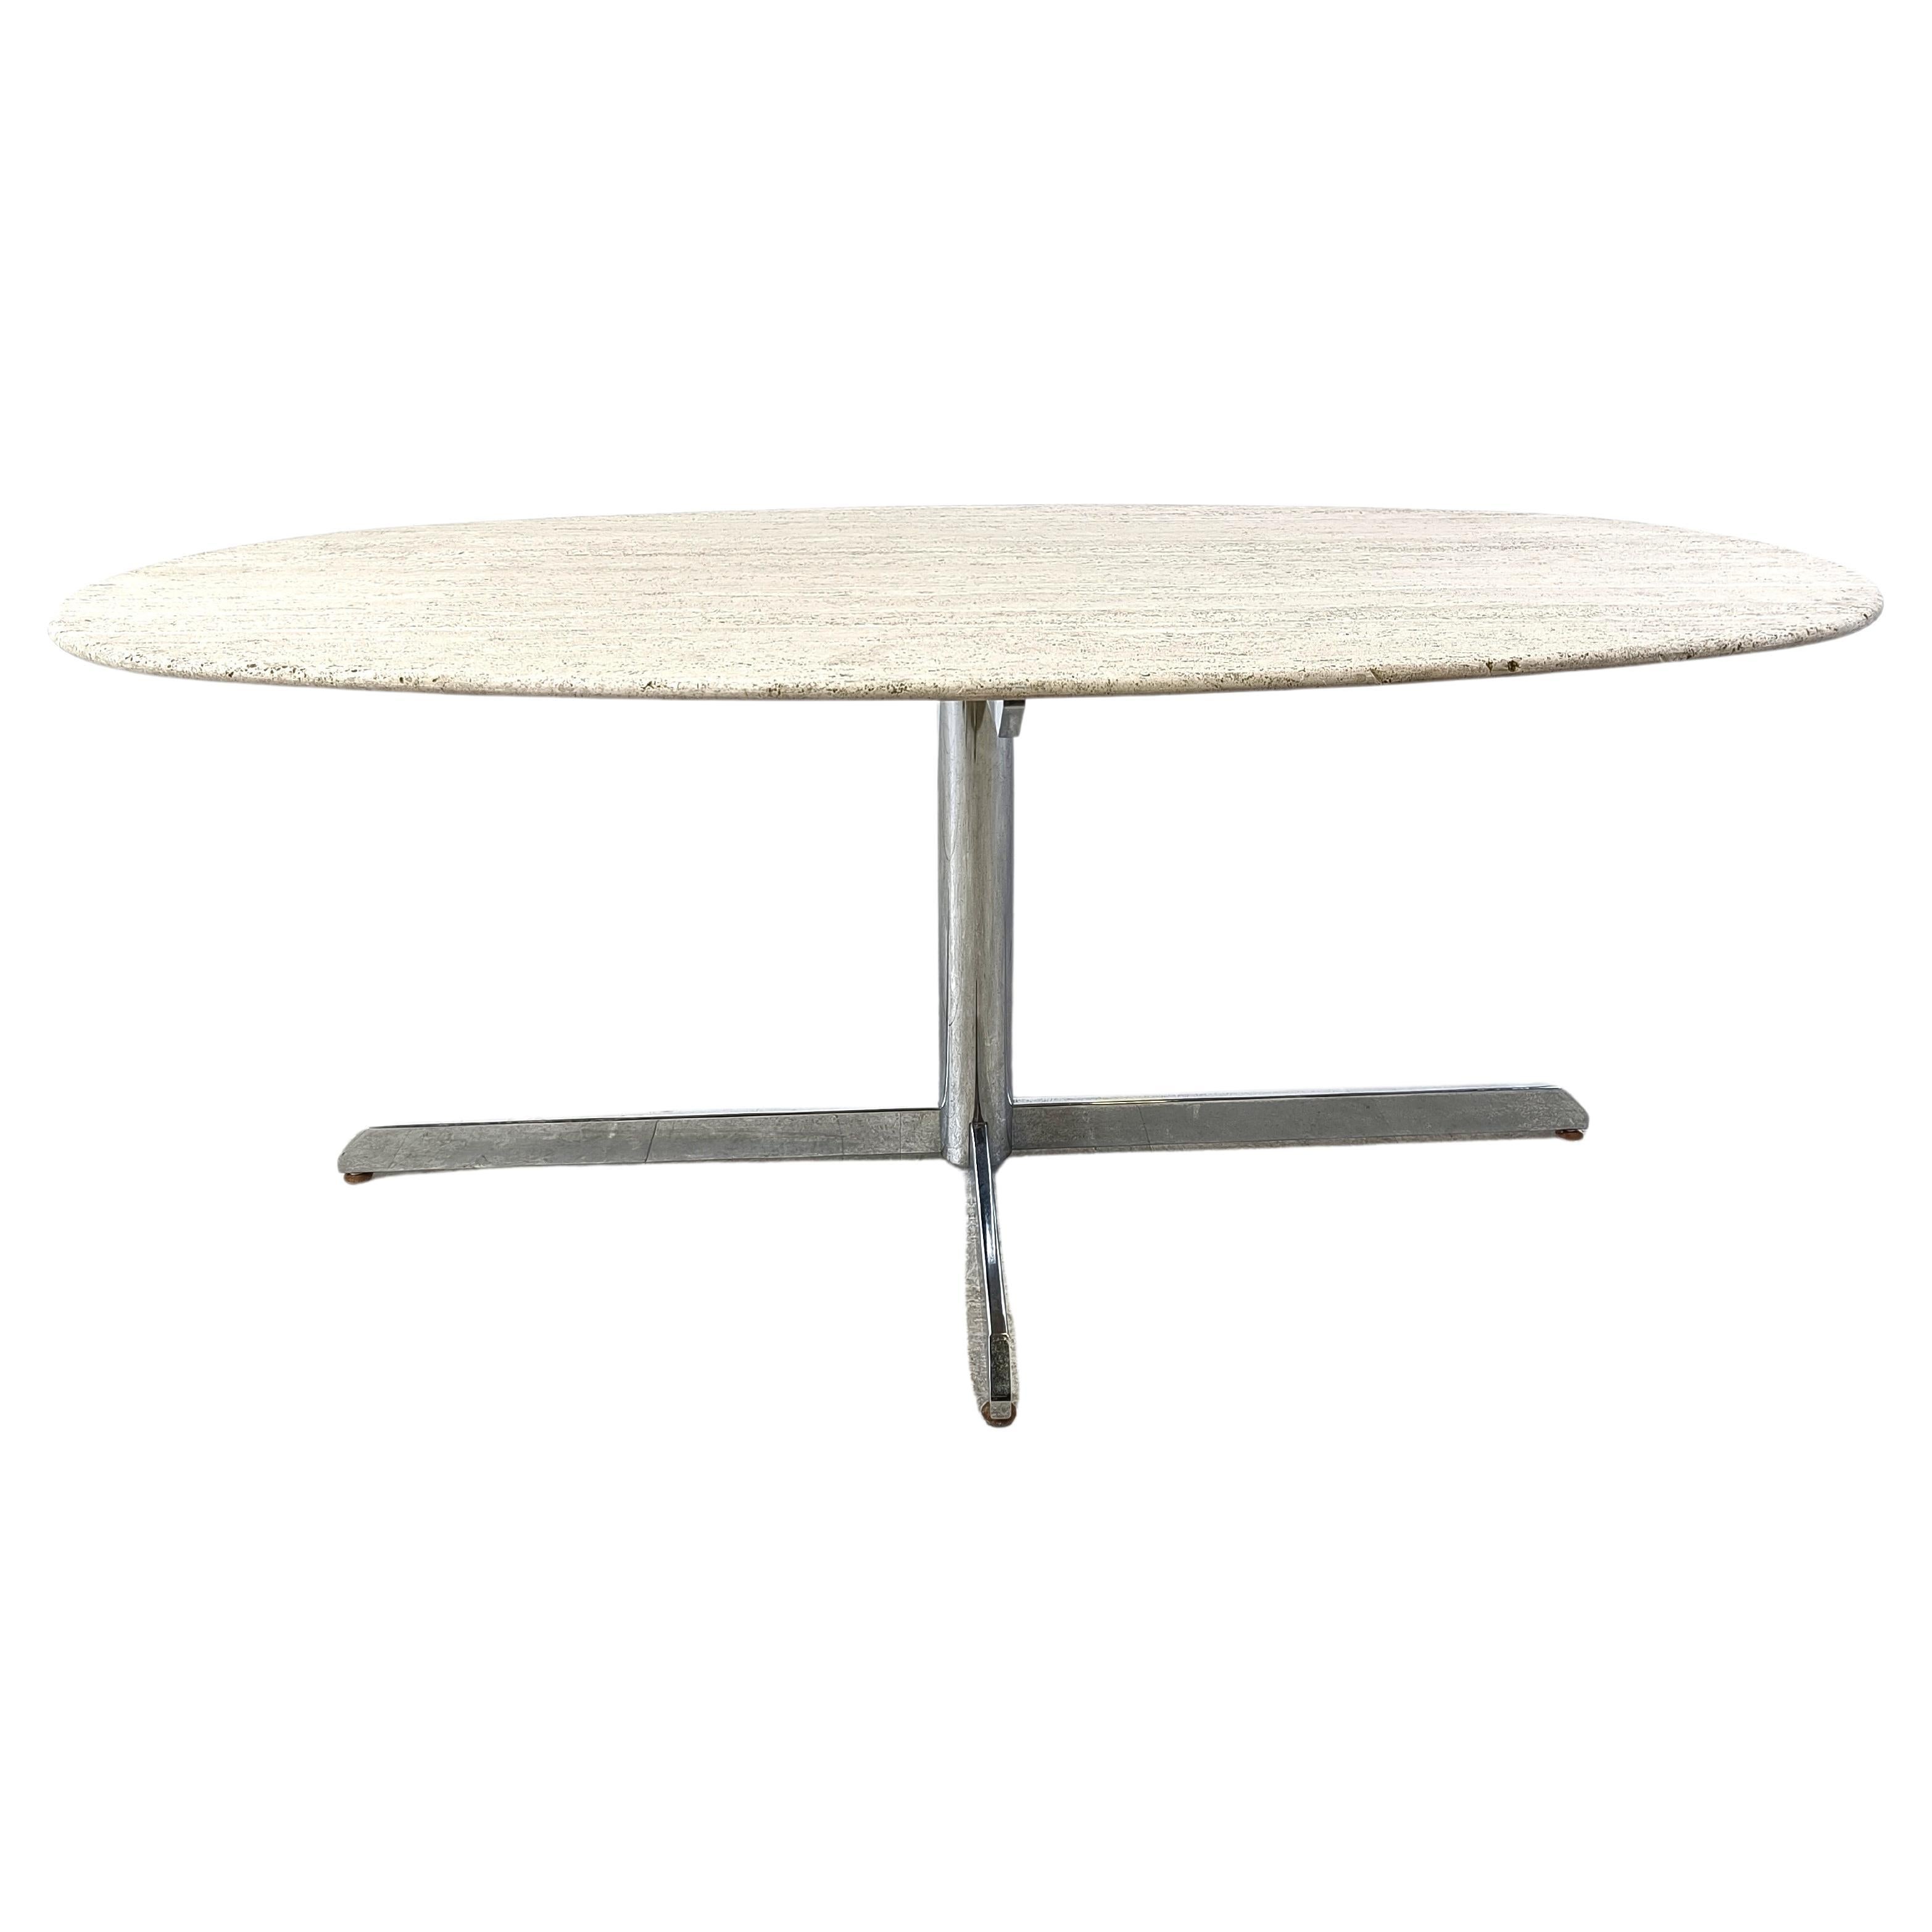 Vintage oval travertine and chrome dining table, 1970s